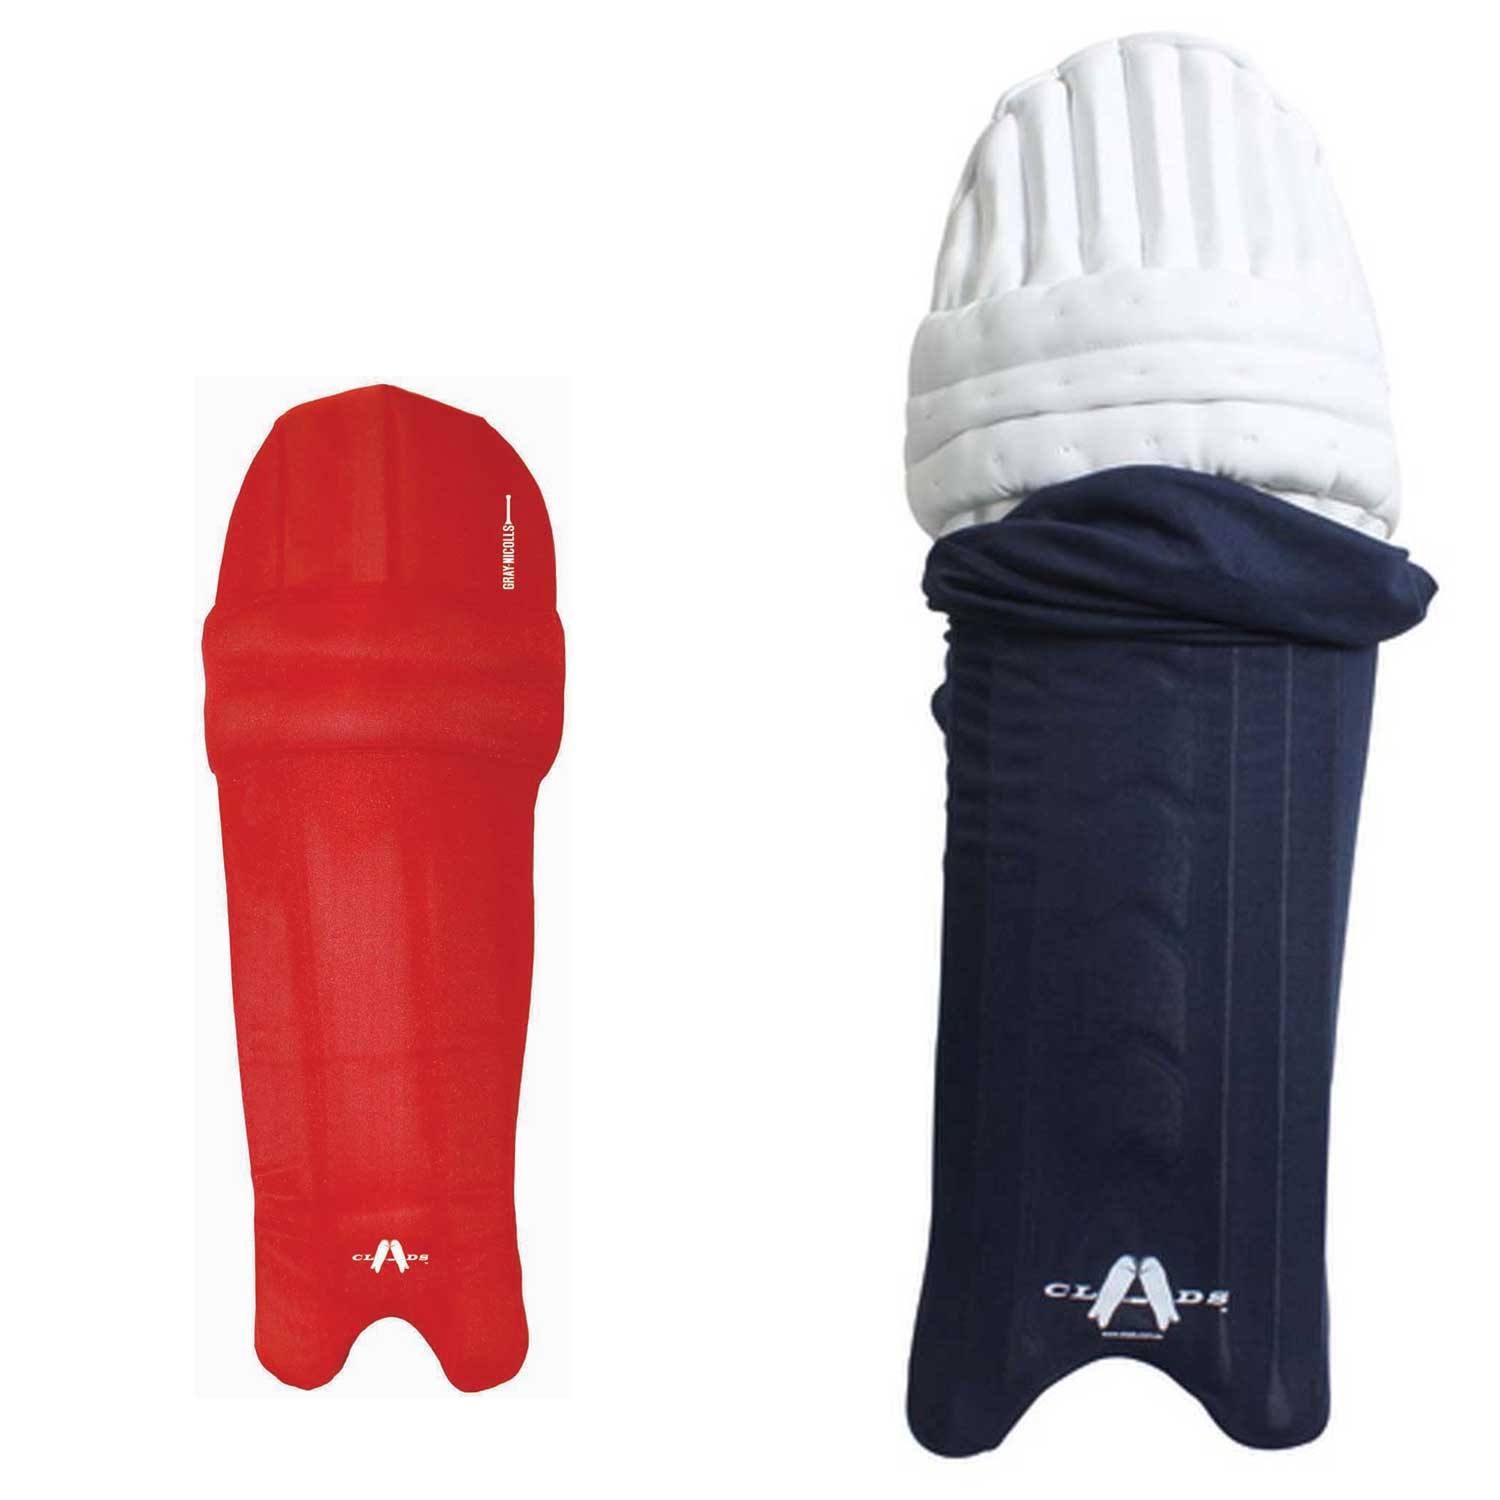 Cricket Pad Covers - Clads